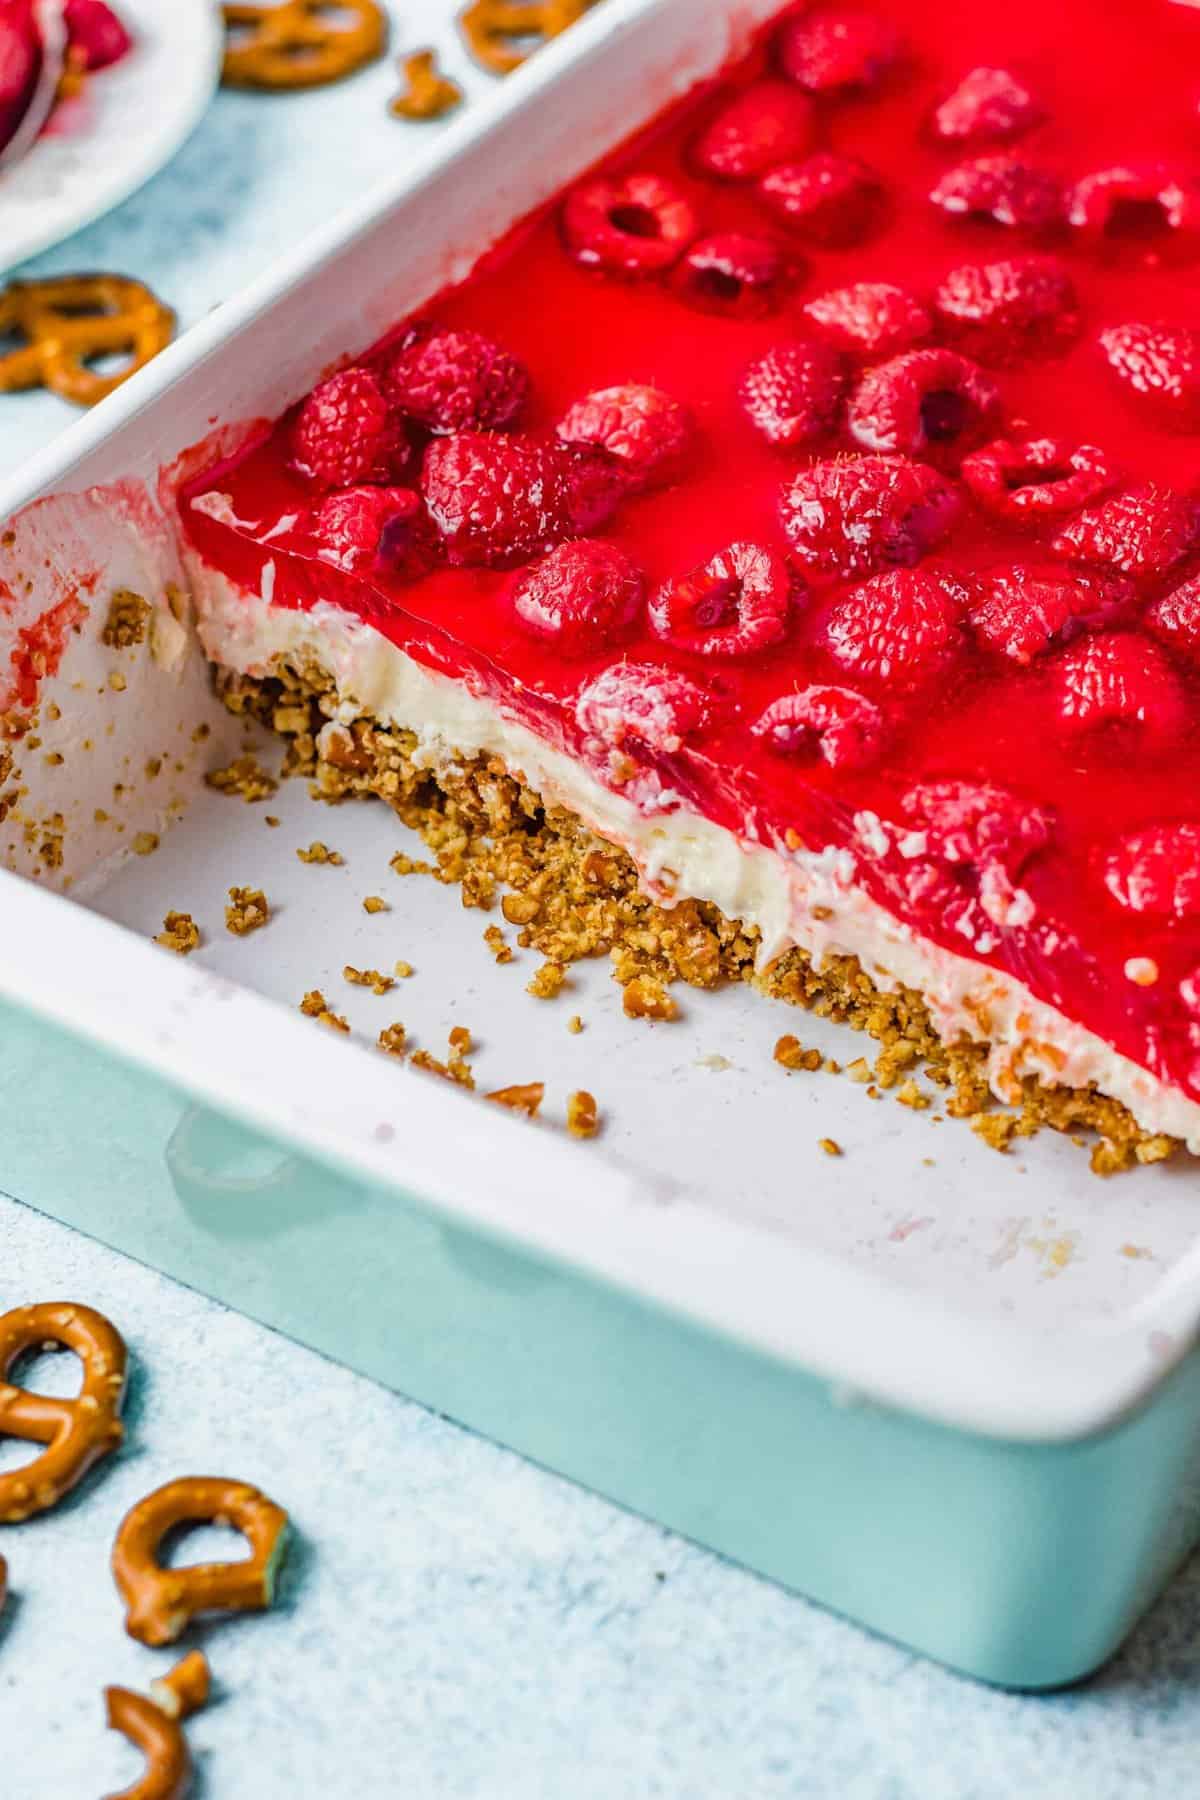 Raspberry pretzel salad in dish, with row of slices removed to show layers